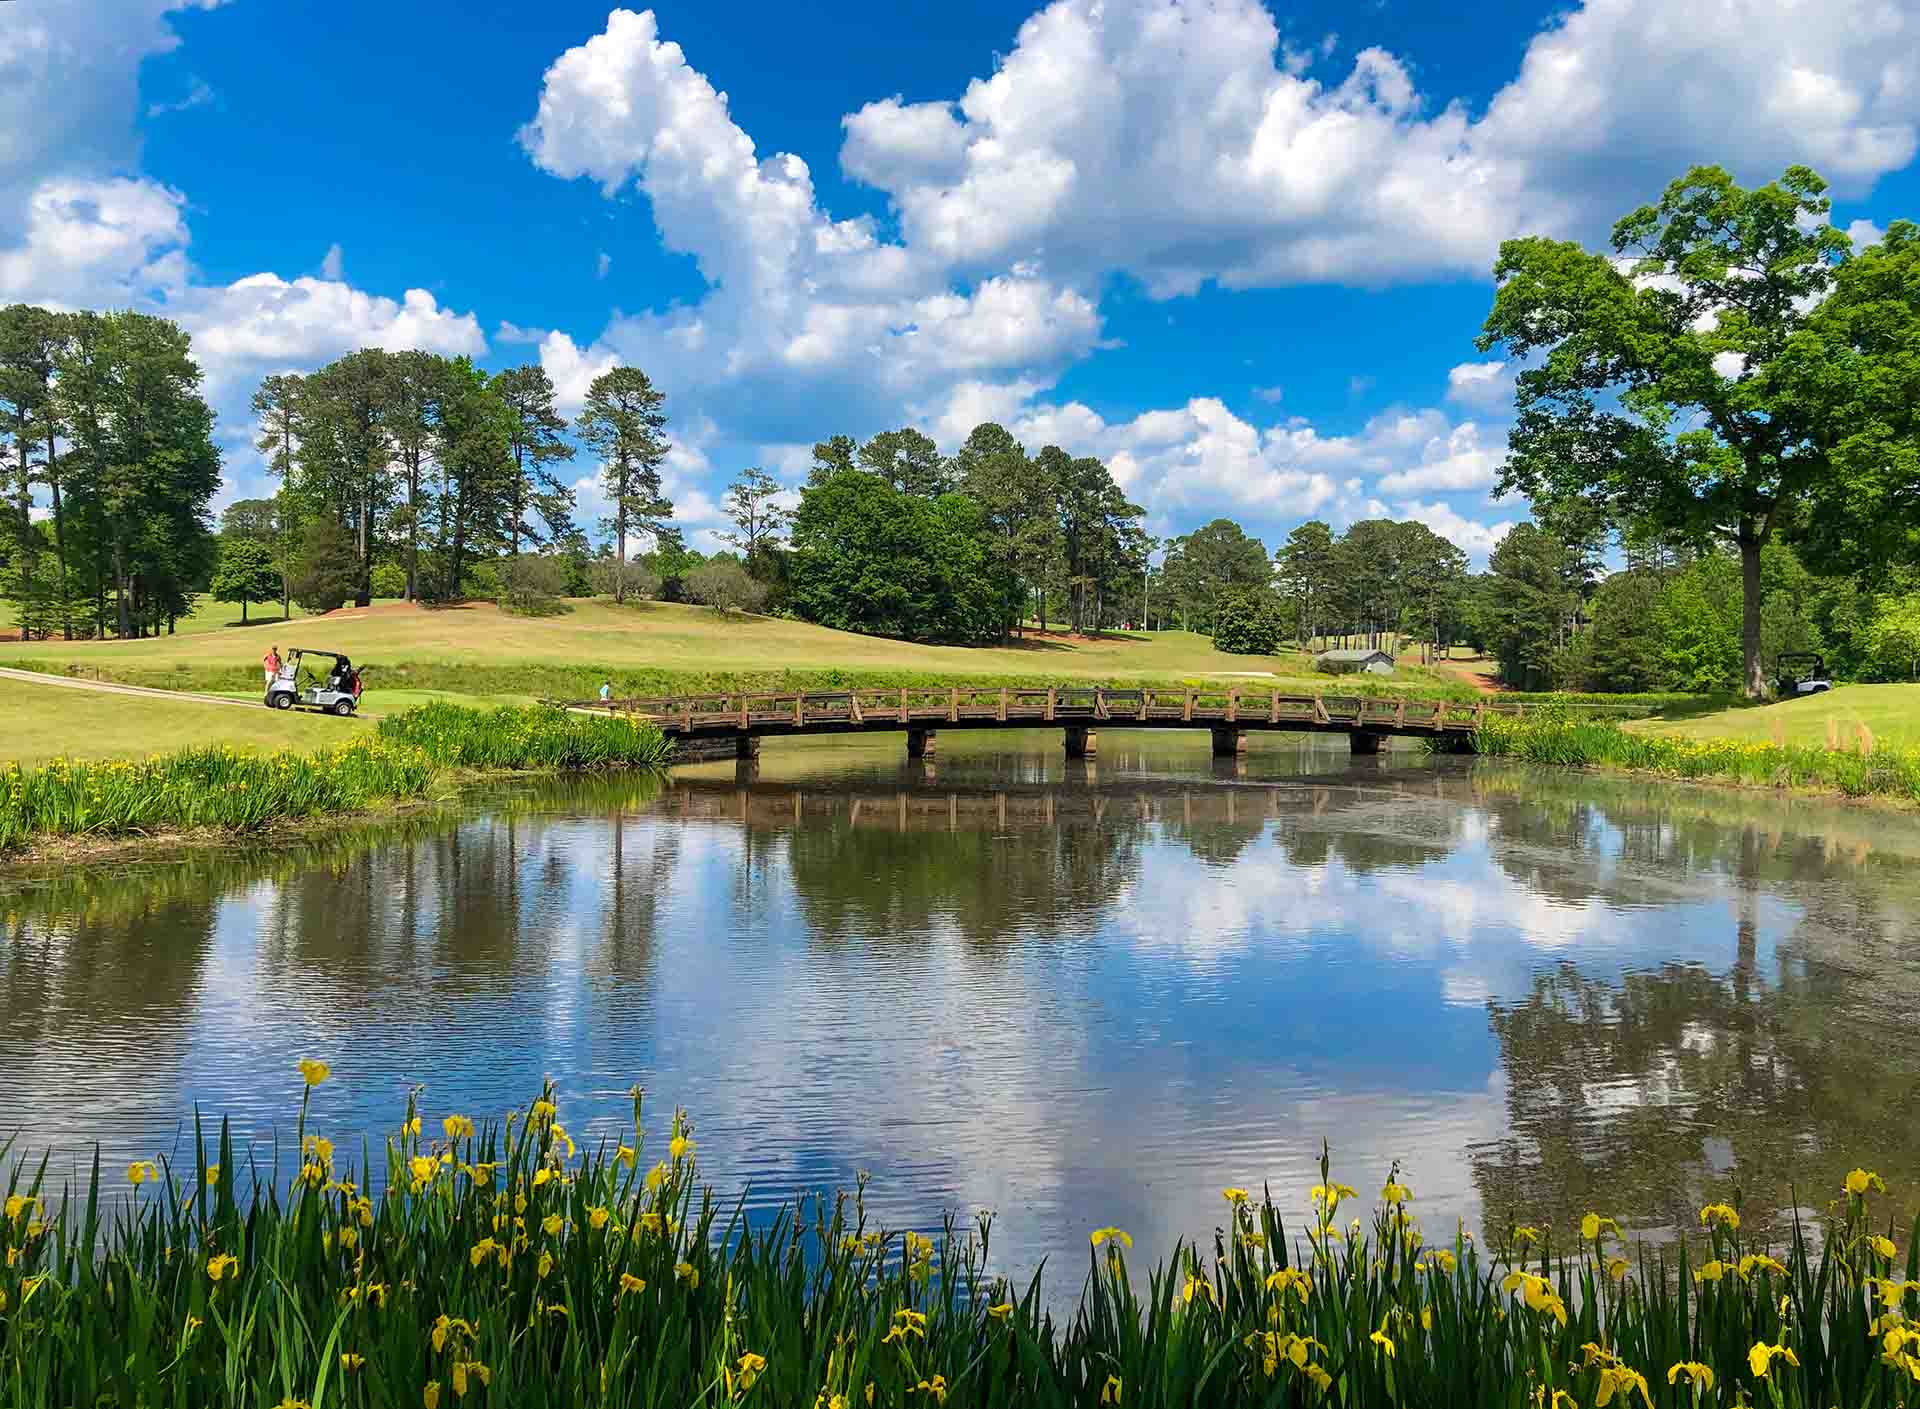 a landscape photo of the UGA golf course featuring a lake in the foreground, a wooden bridge crossing the lake, and the golf green and trees in the background. A person stands next to a golf cart on the left-hand side of the green.